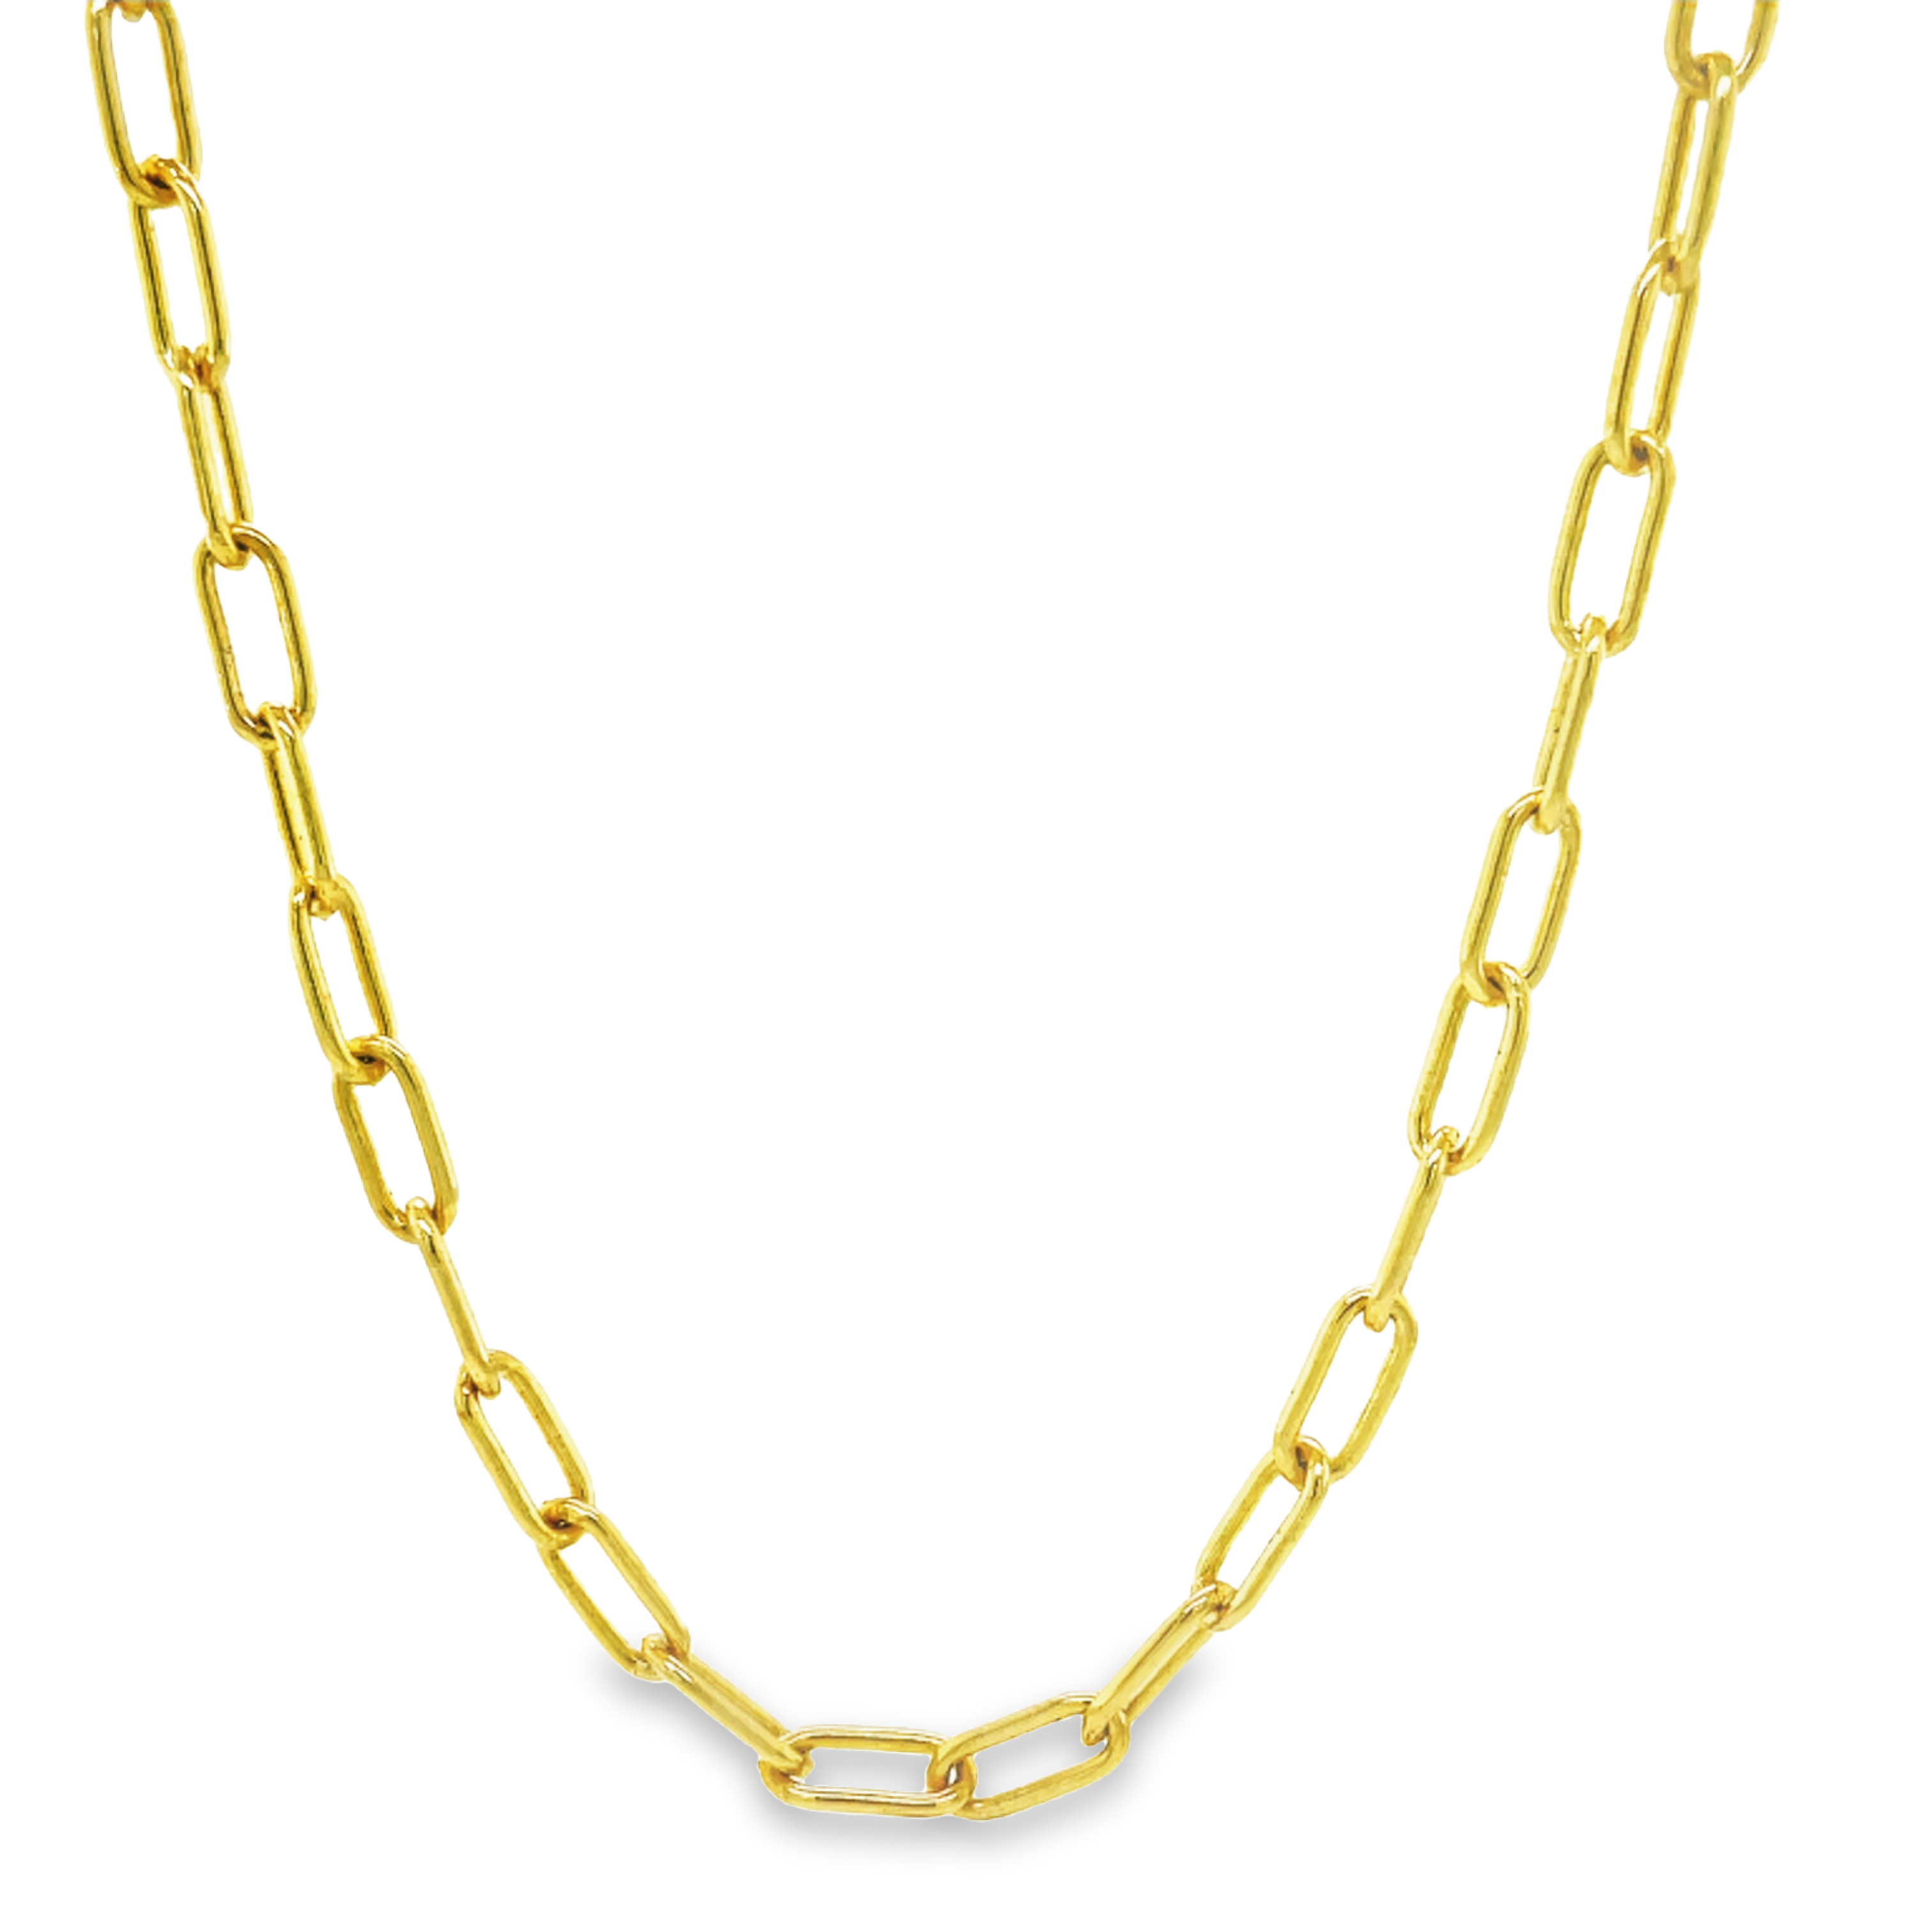 14k yellow gold.  Anchor link  Italian made  Secure lobster catch.  22" long.  3.90 mm thickness.